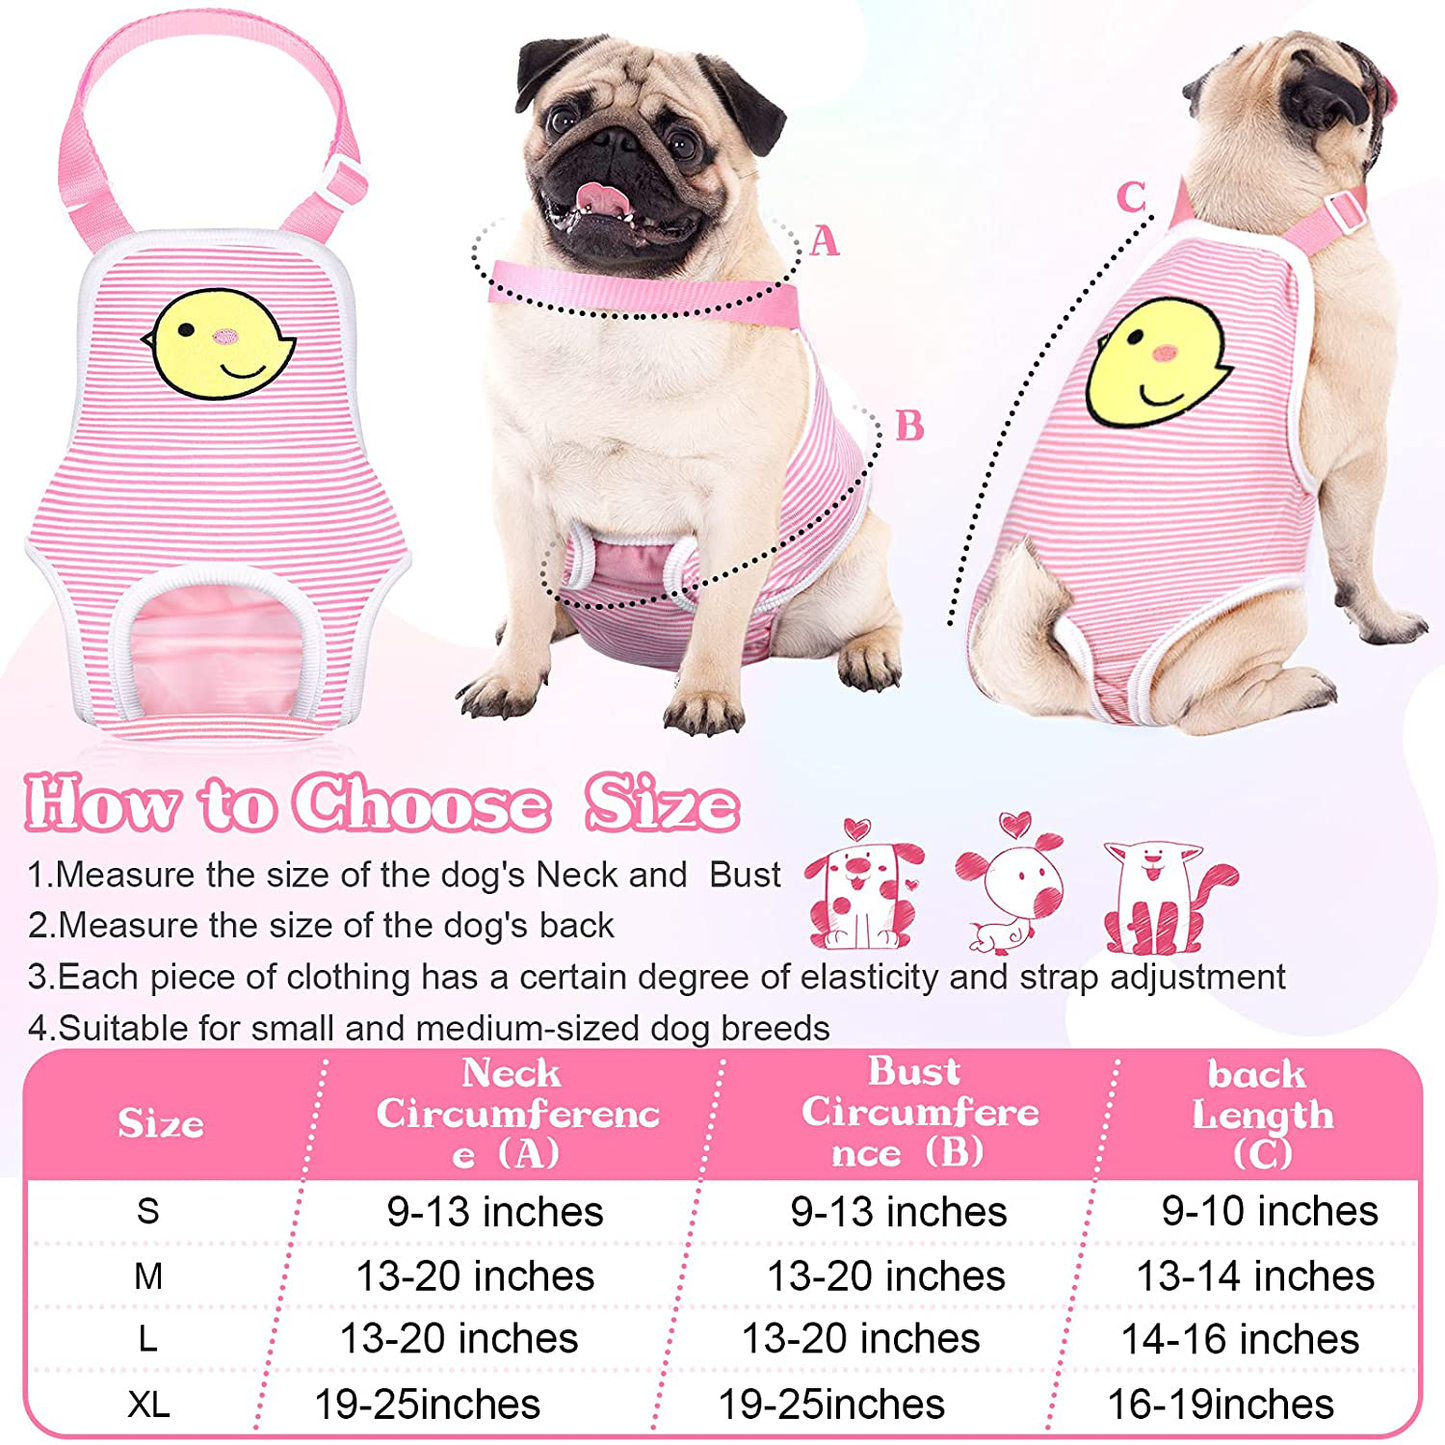 Nuanchu 3 Pieces Dog Diaper Striped Sanitary Pantie with Adjustable Suspender Washable Reusable Puppy Sanitary Panties Cute Pet Underwear Diaper Jumpsuits for Female Dogs